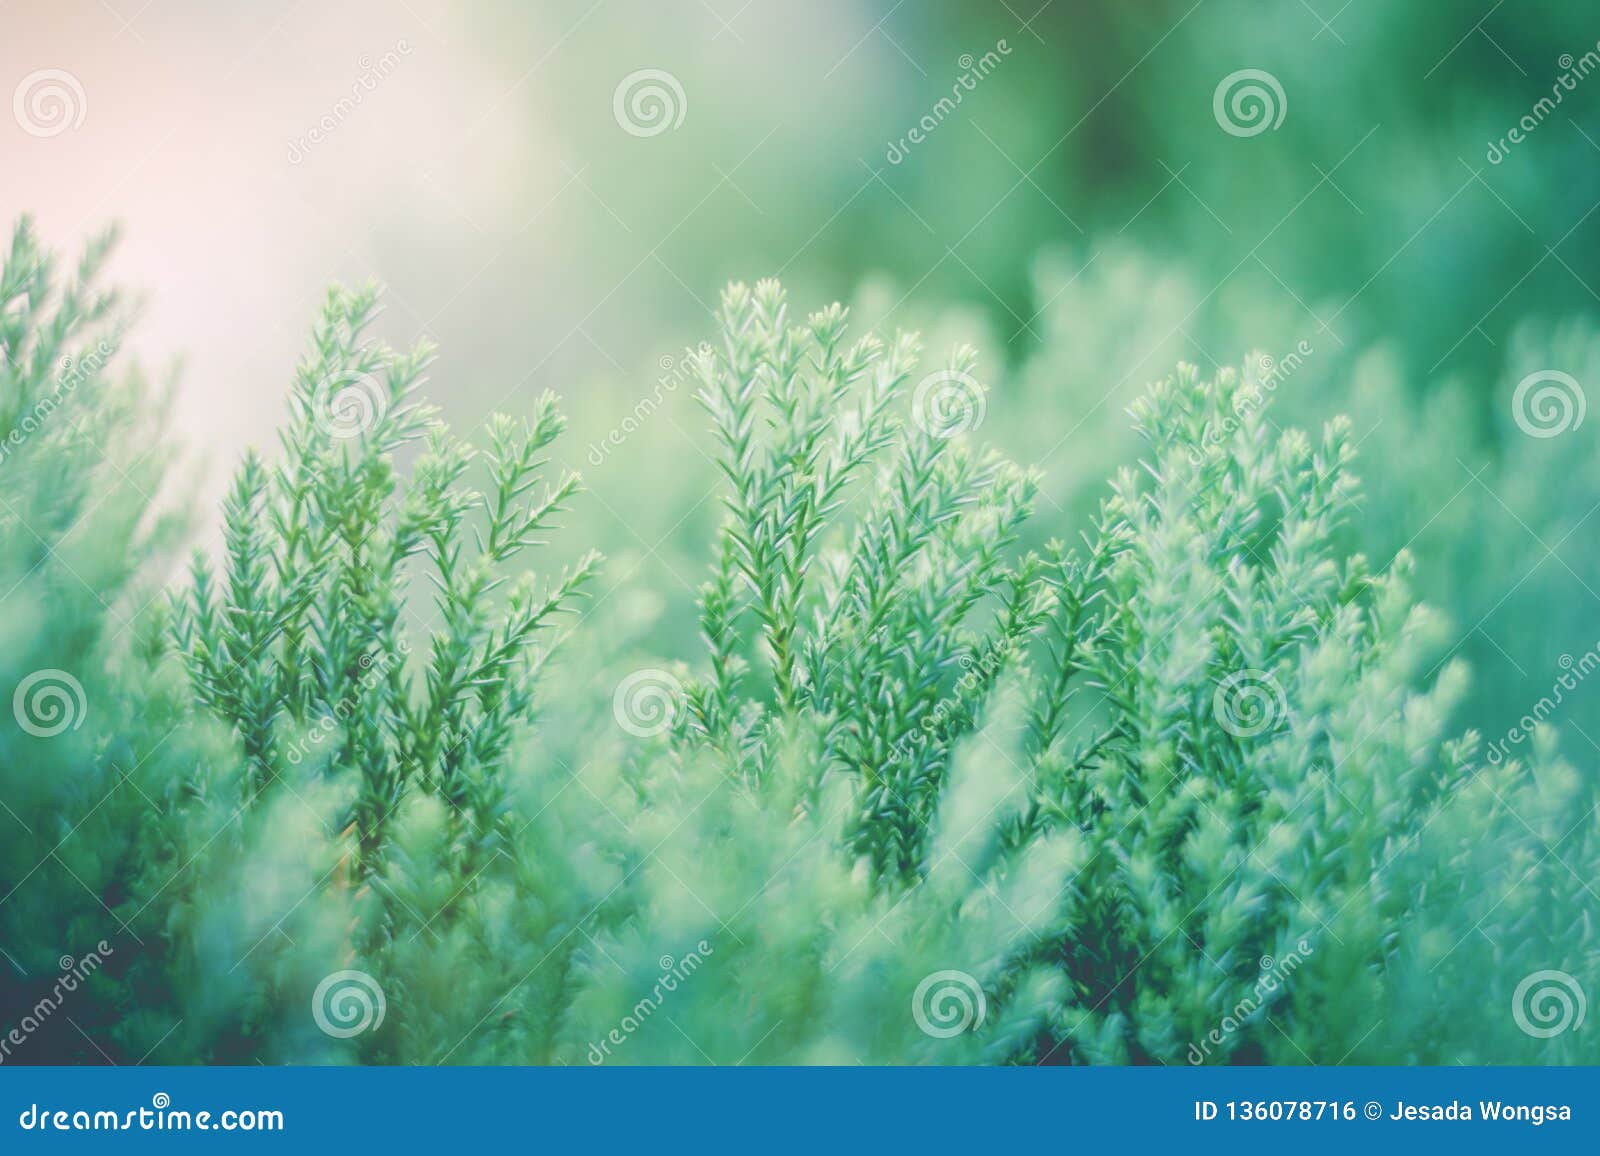 529,948 Fresh Nature Wallpaper Stock Photos - Free & Royalty-Free Stock  Photos from Dreamstime